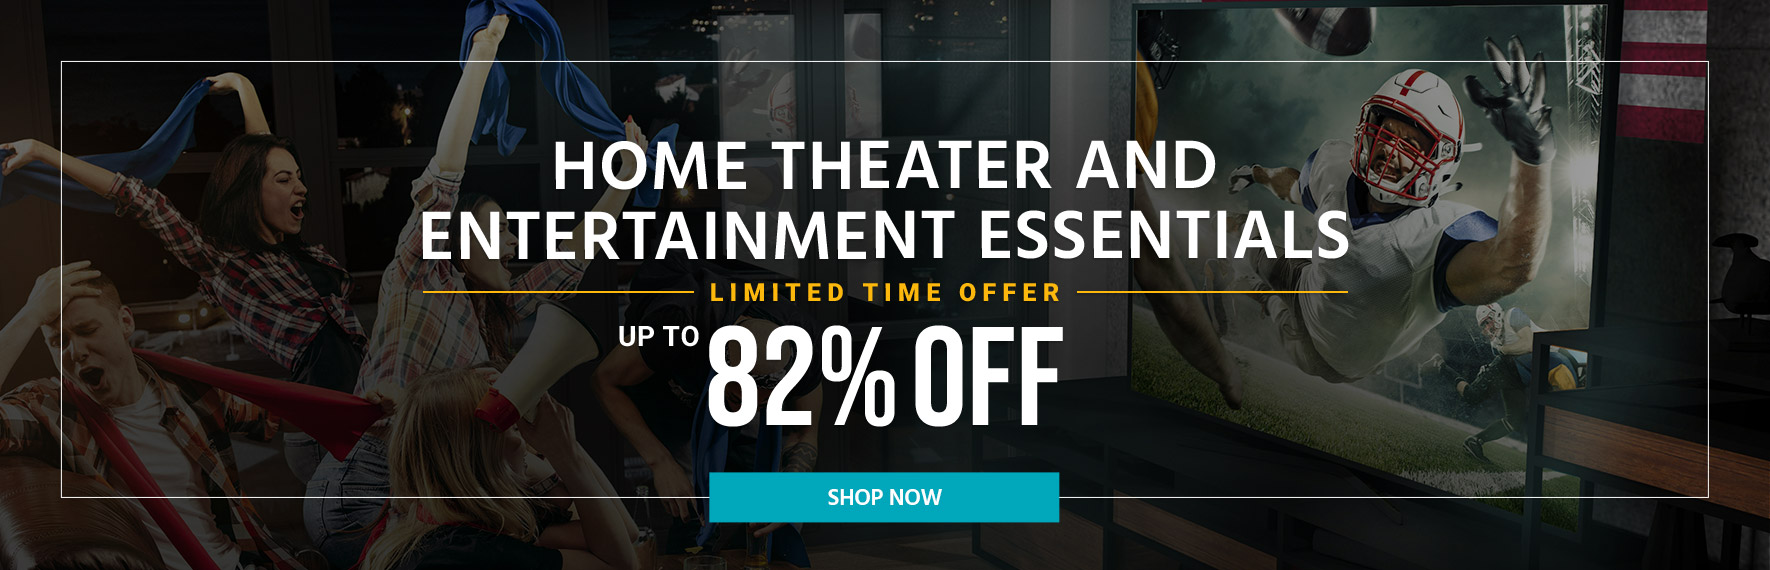 "Home Theater and Entertainment Essentials Up to 82% off Limited Time Offer Shop Now"